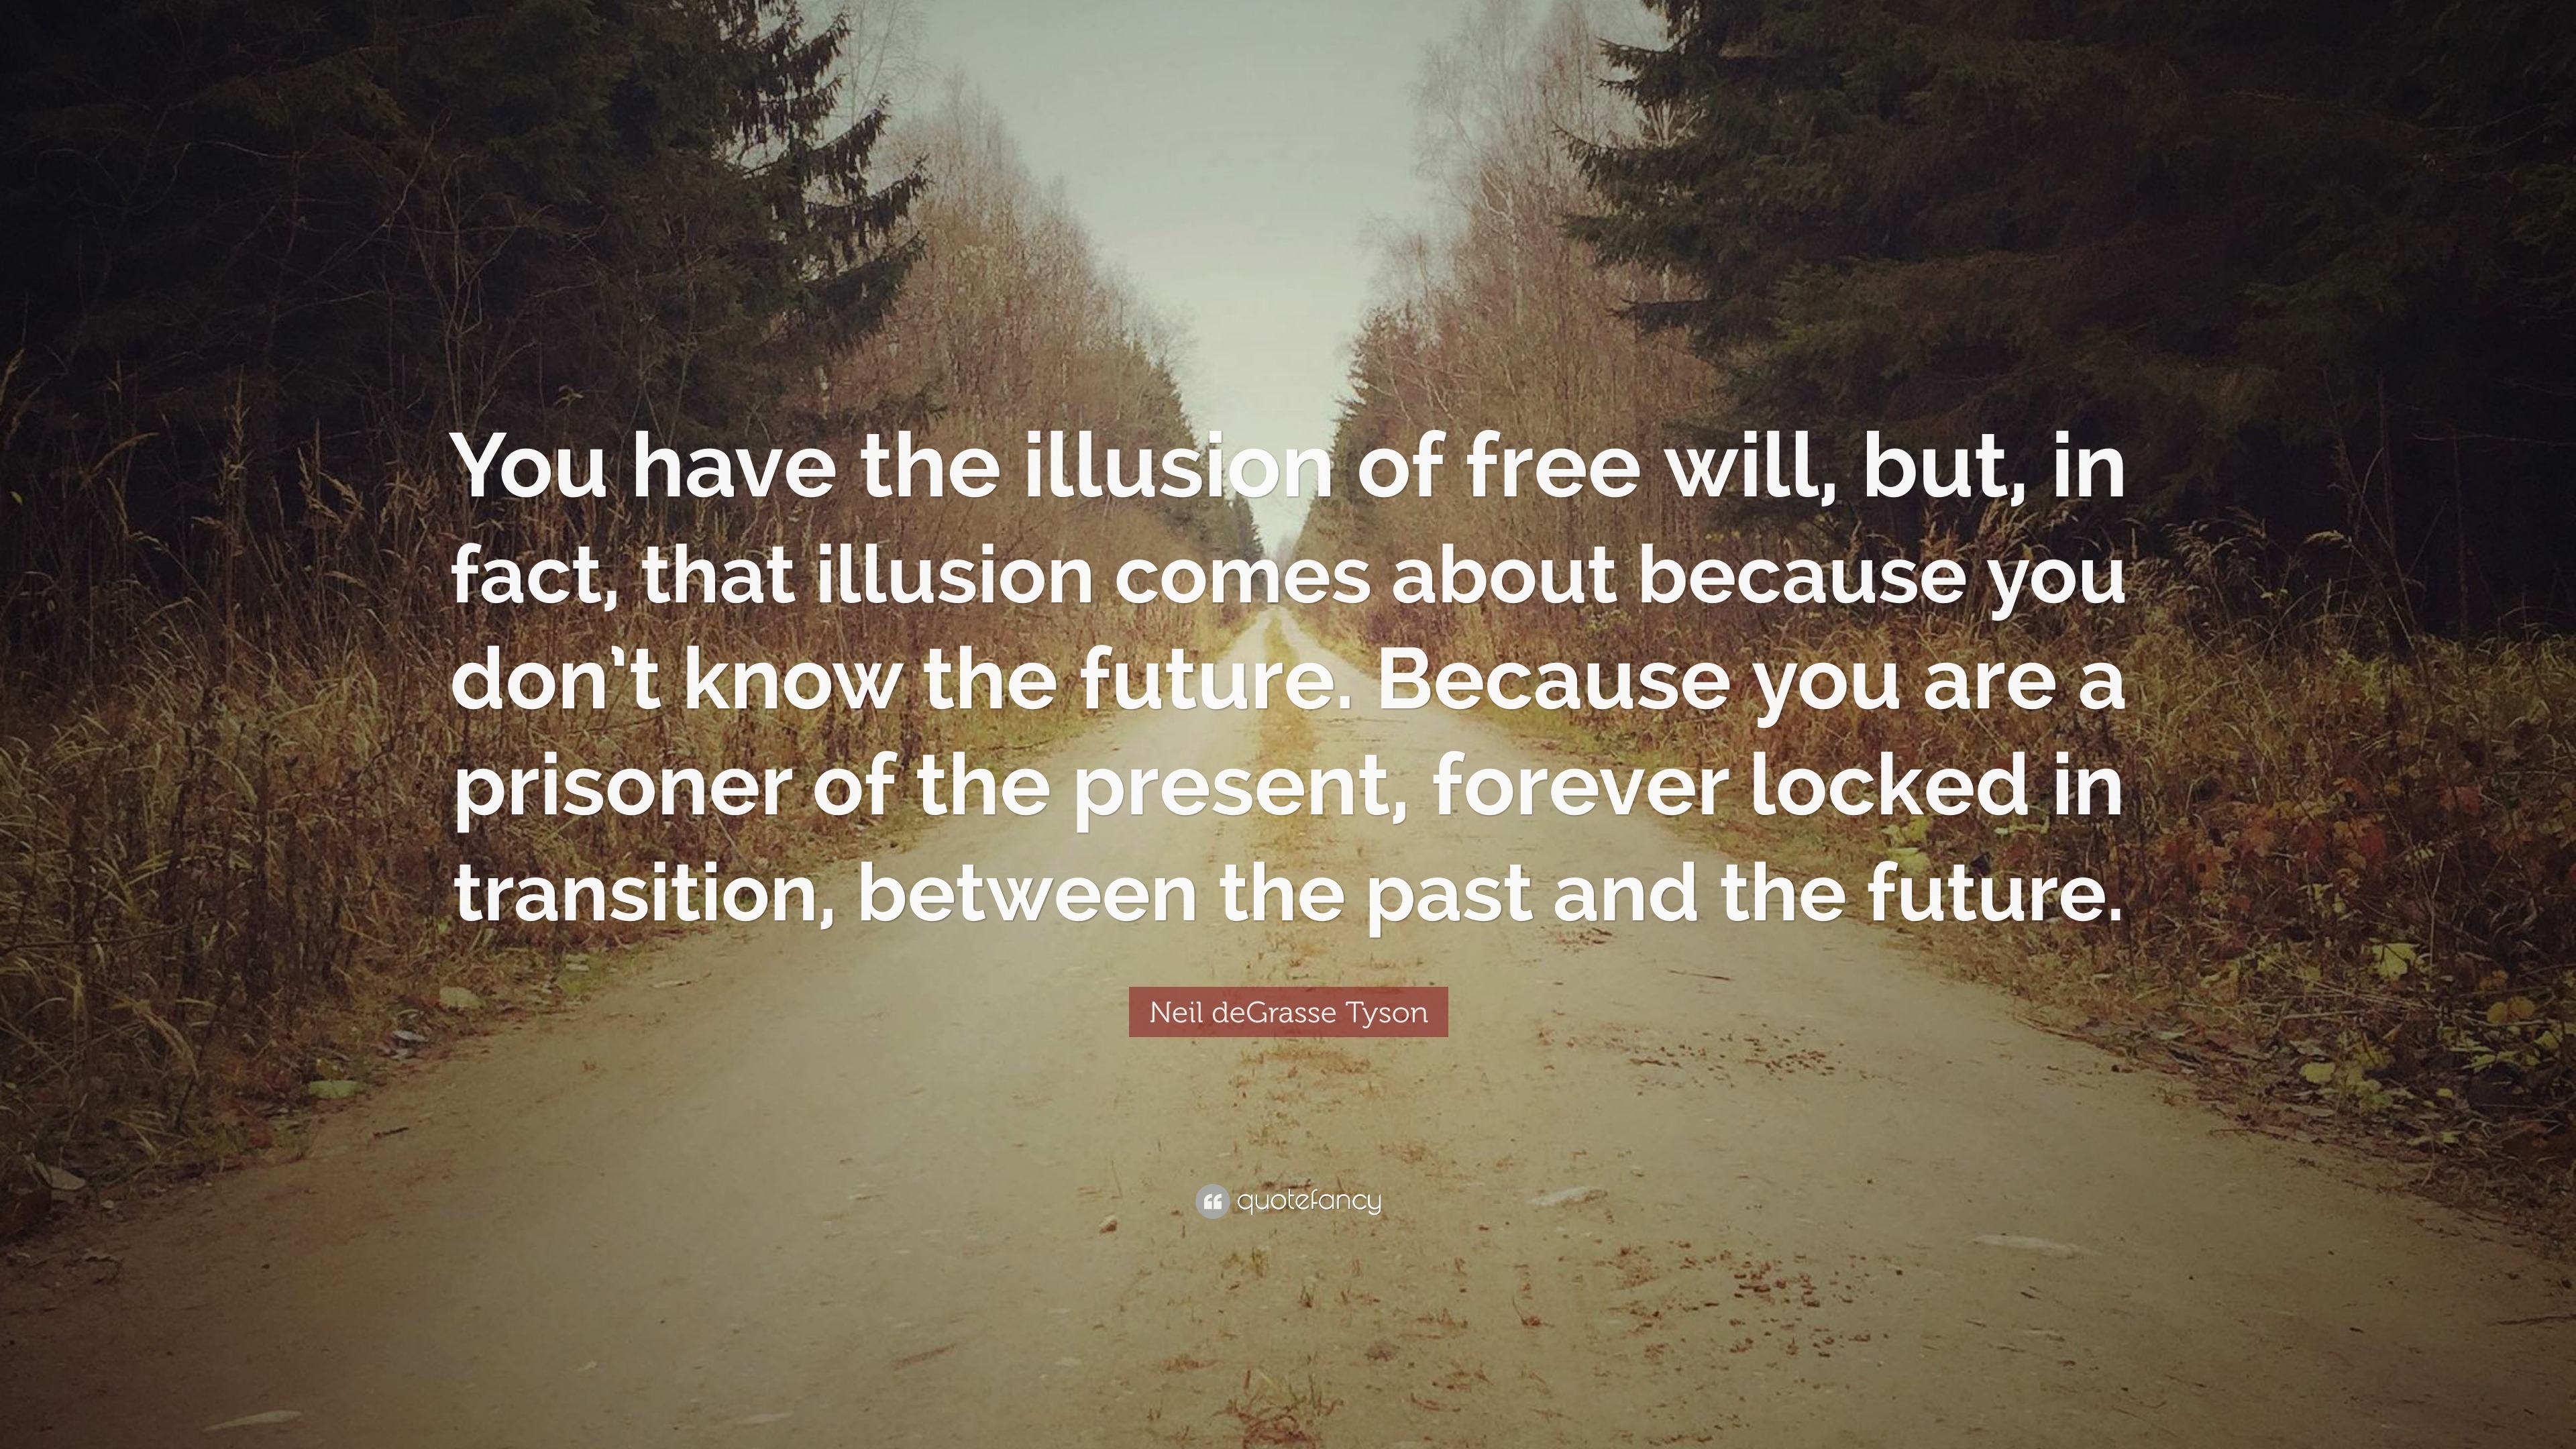 Neil deGrasse Tyson Quote: “You have the illusion of free will, but, in